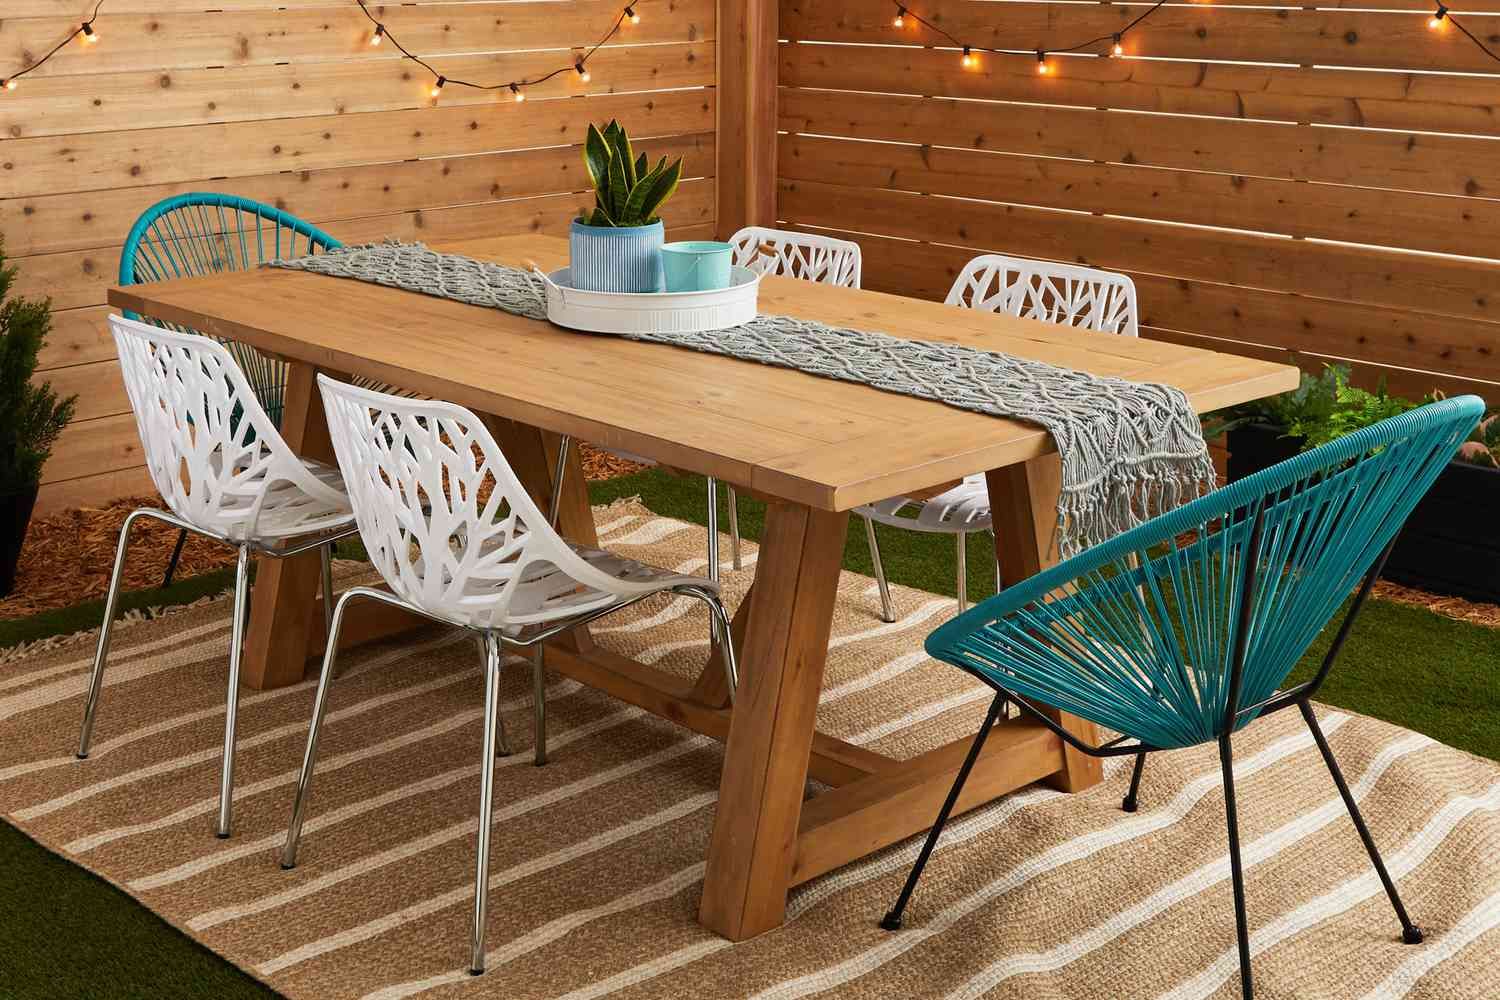 18 Diy Outdoor Table Plans With Regard To Modern Outdoor Patio Coffee Tables (View 10 of 15)